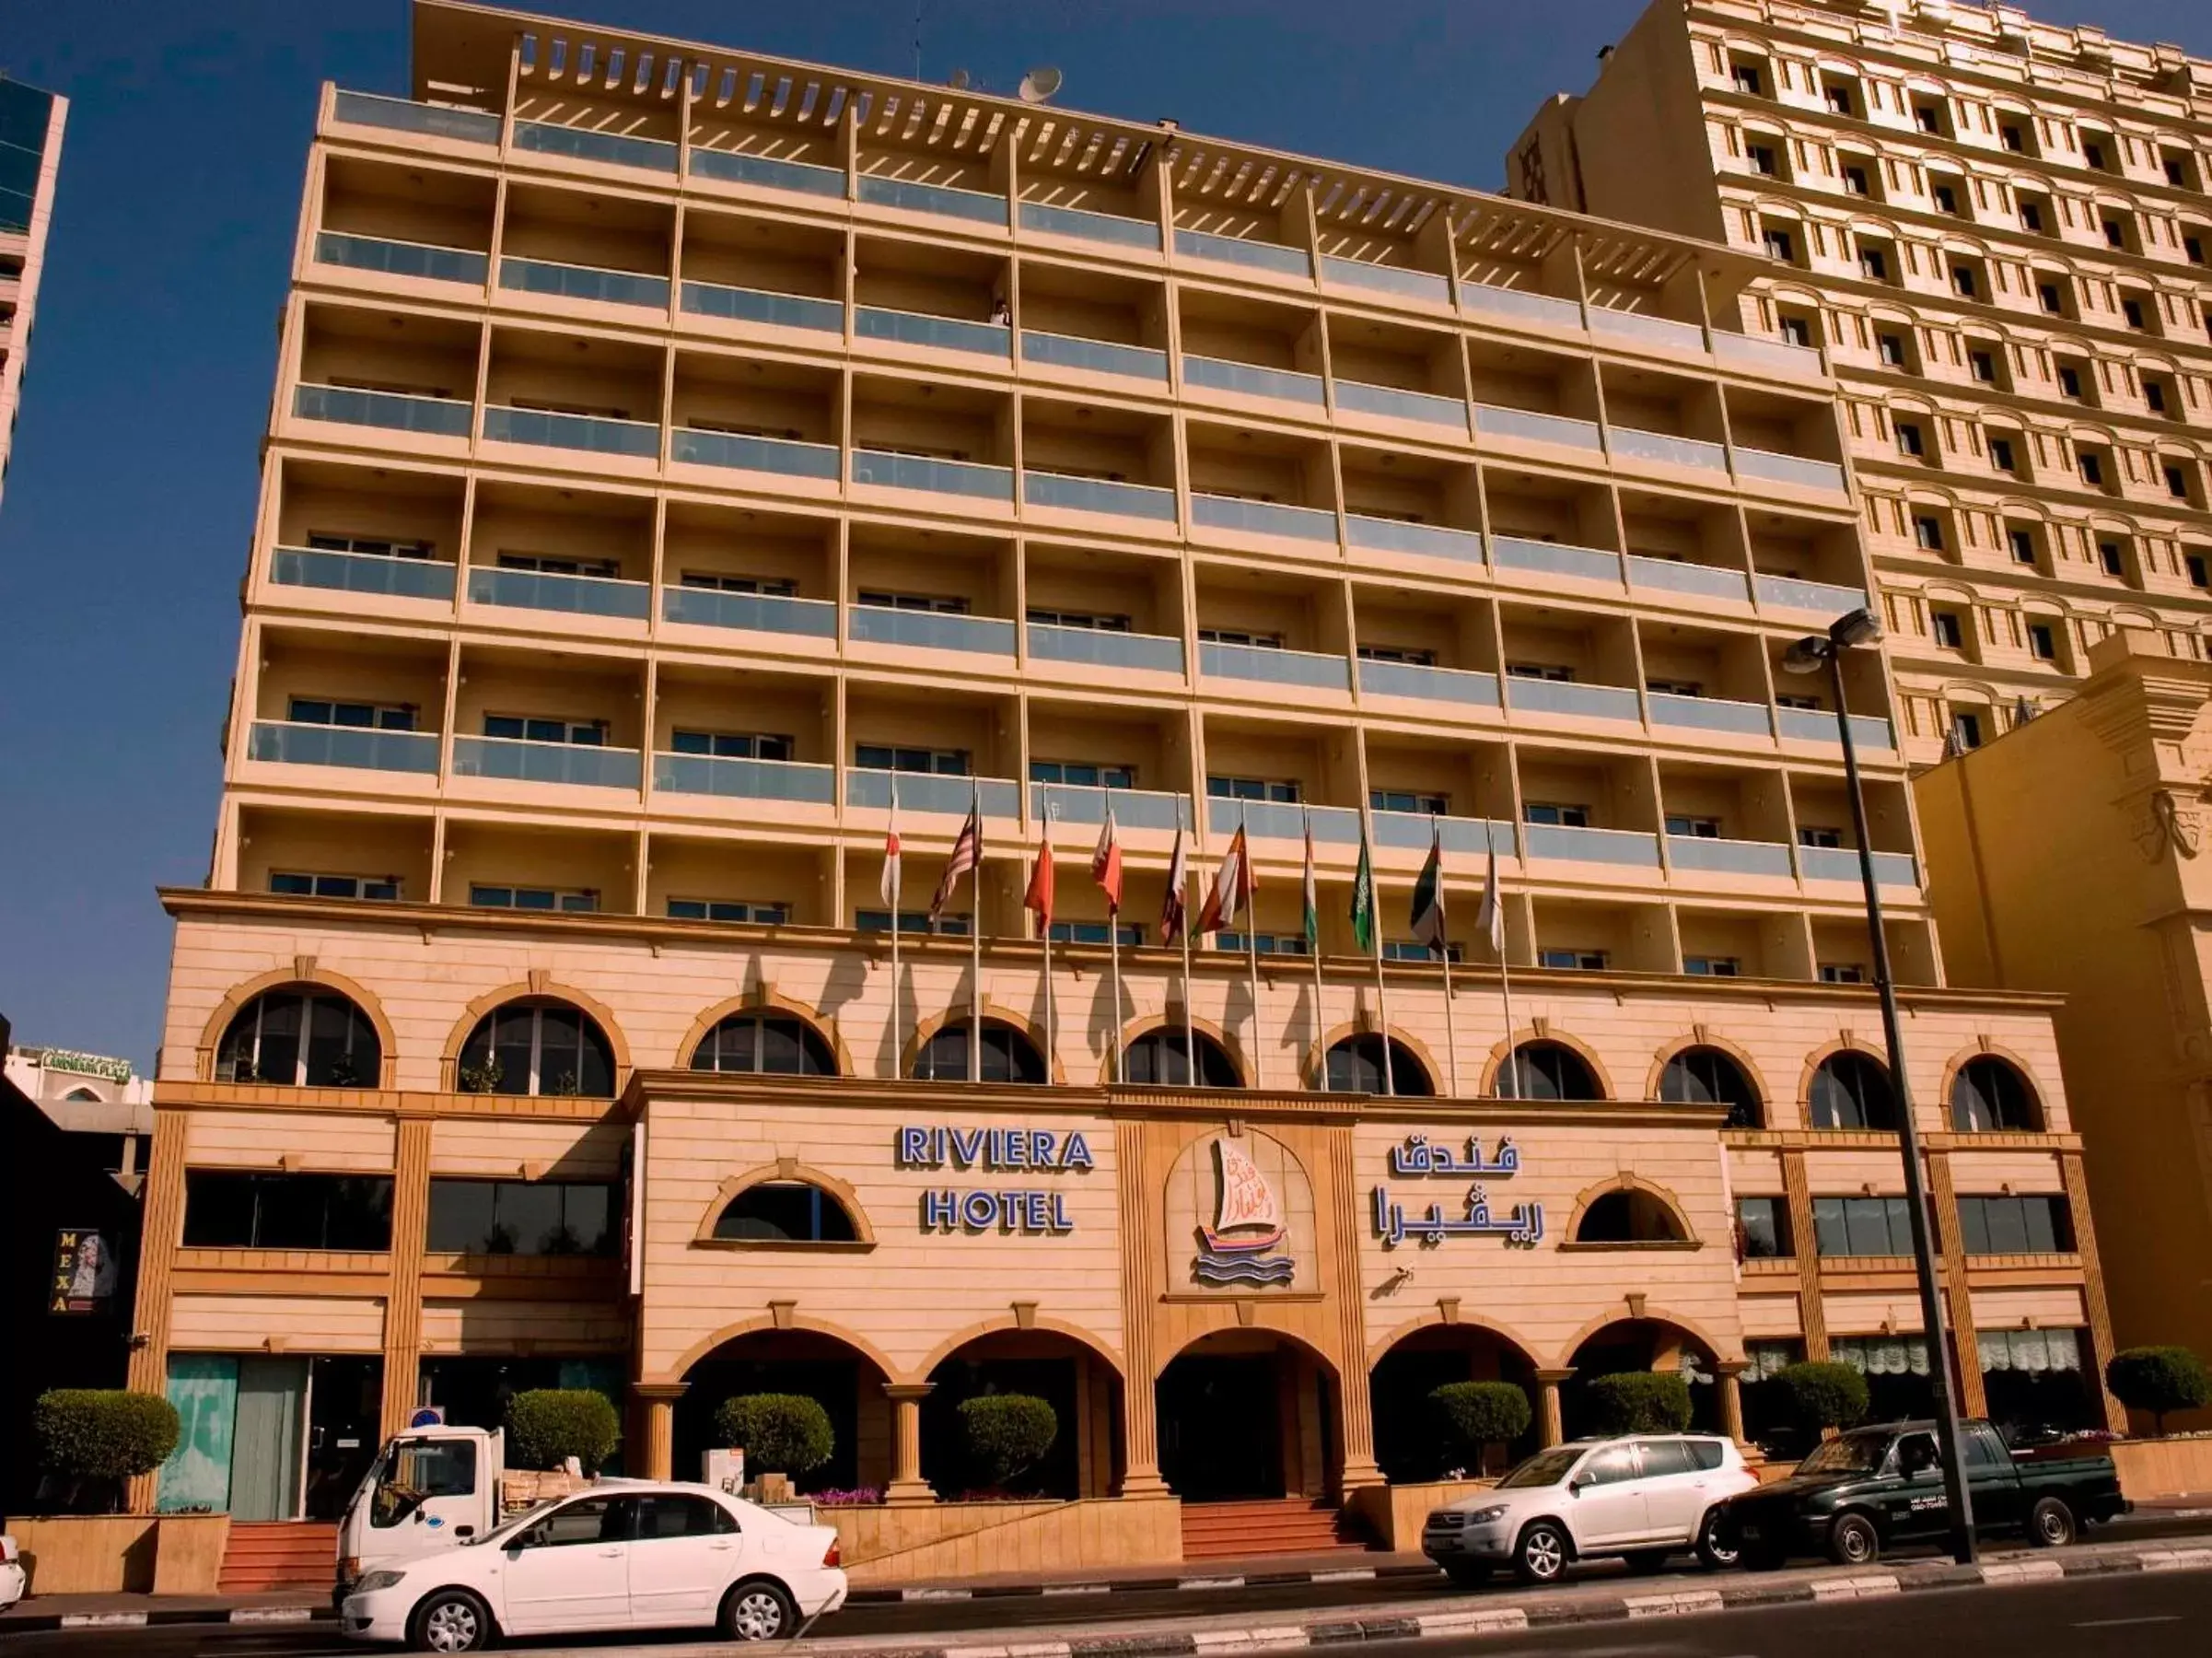 Property Building in Riviera Hotel